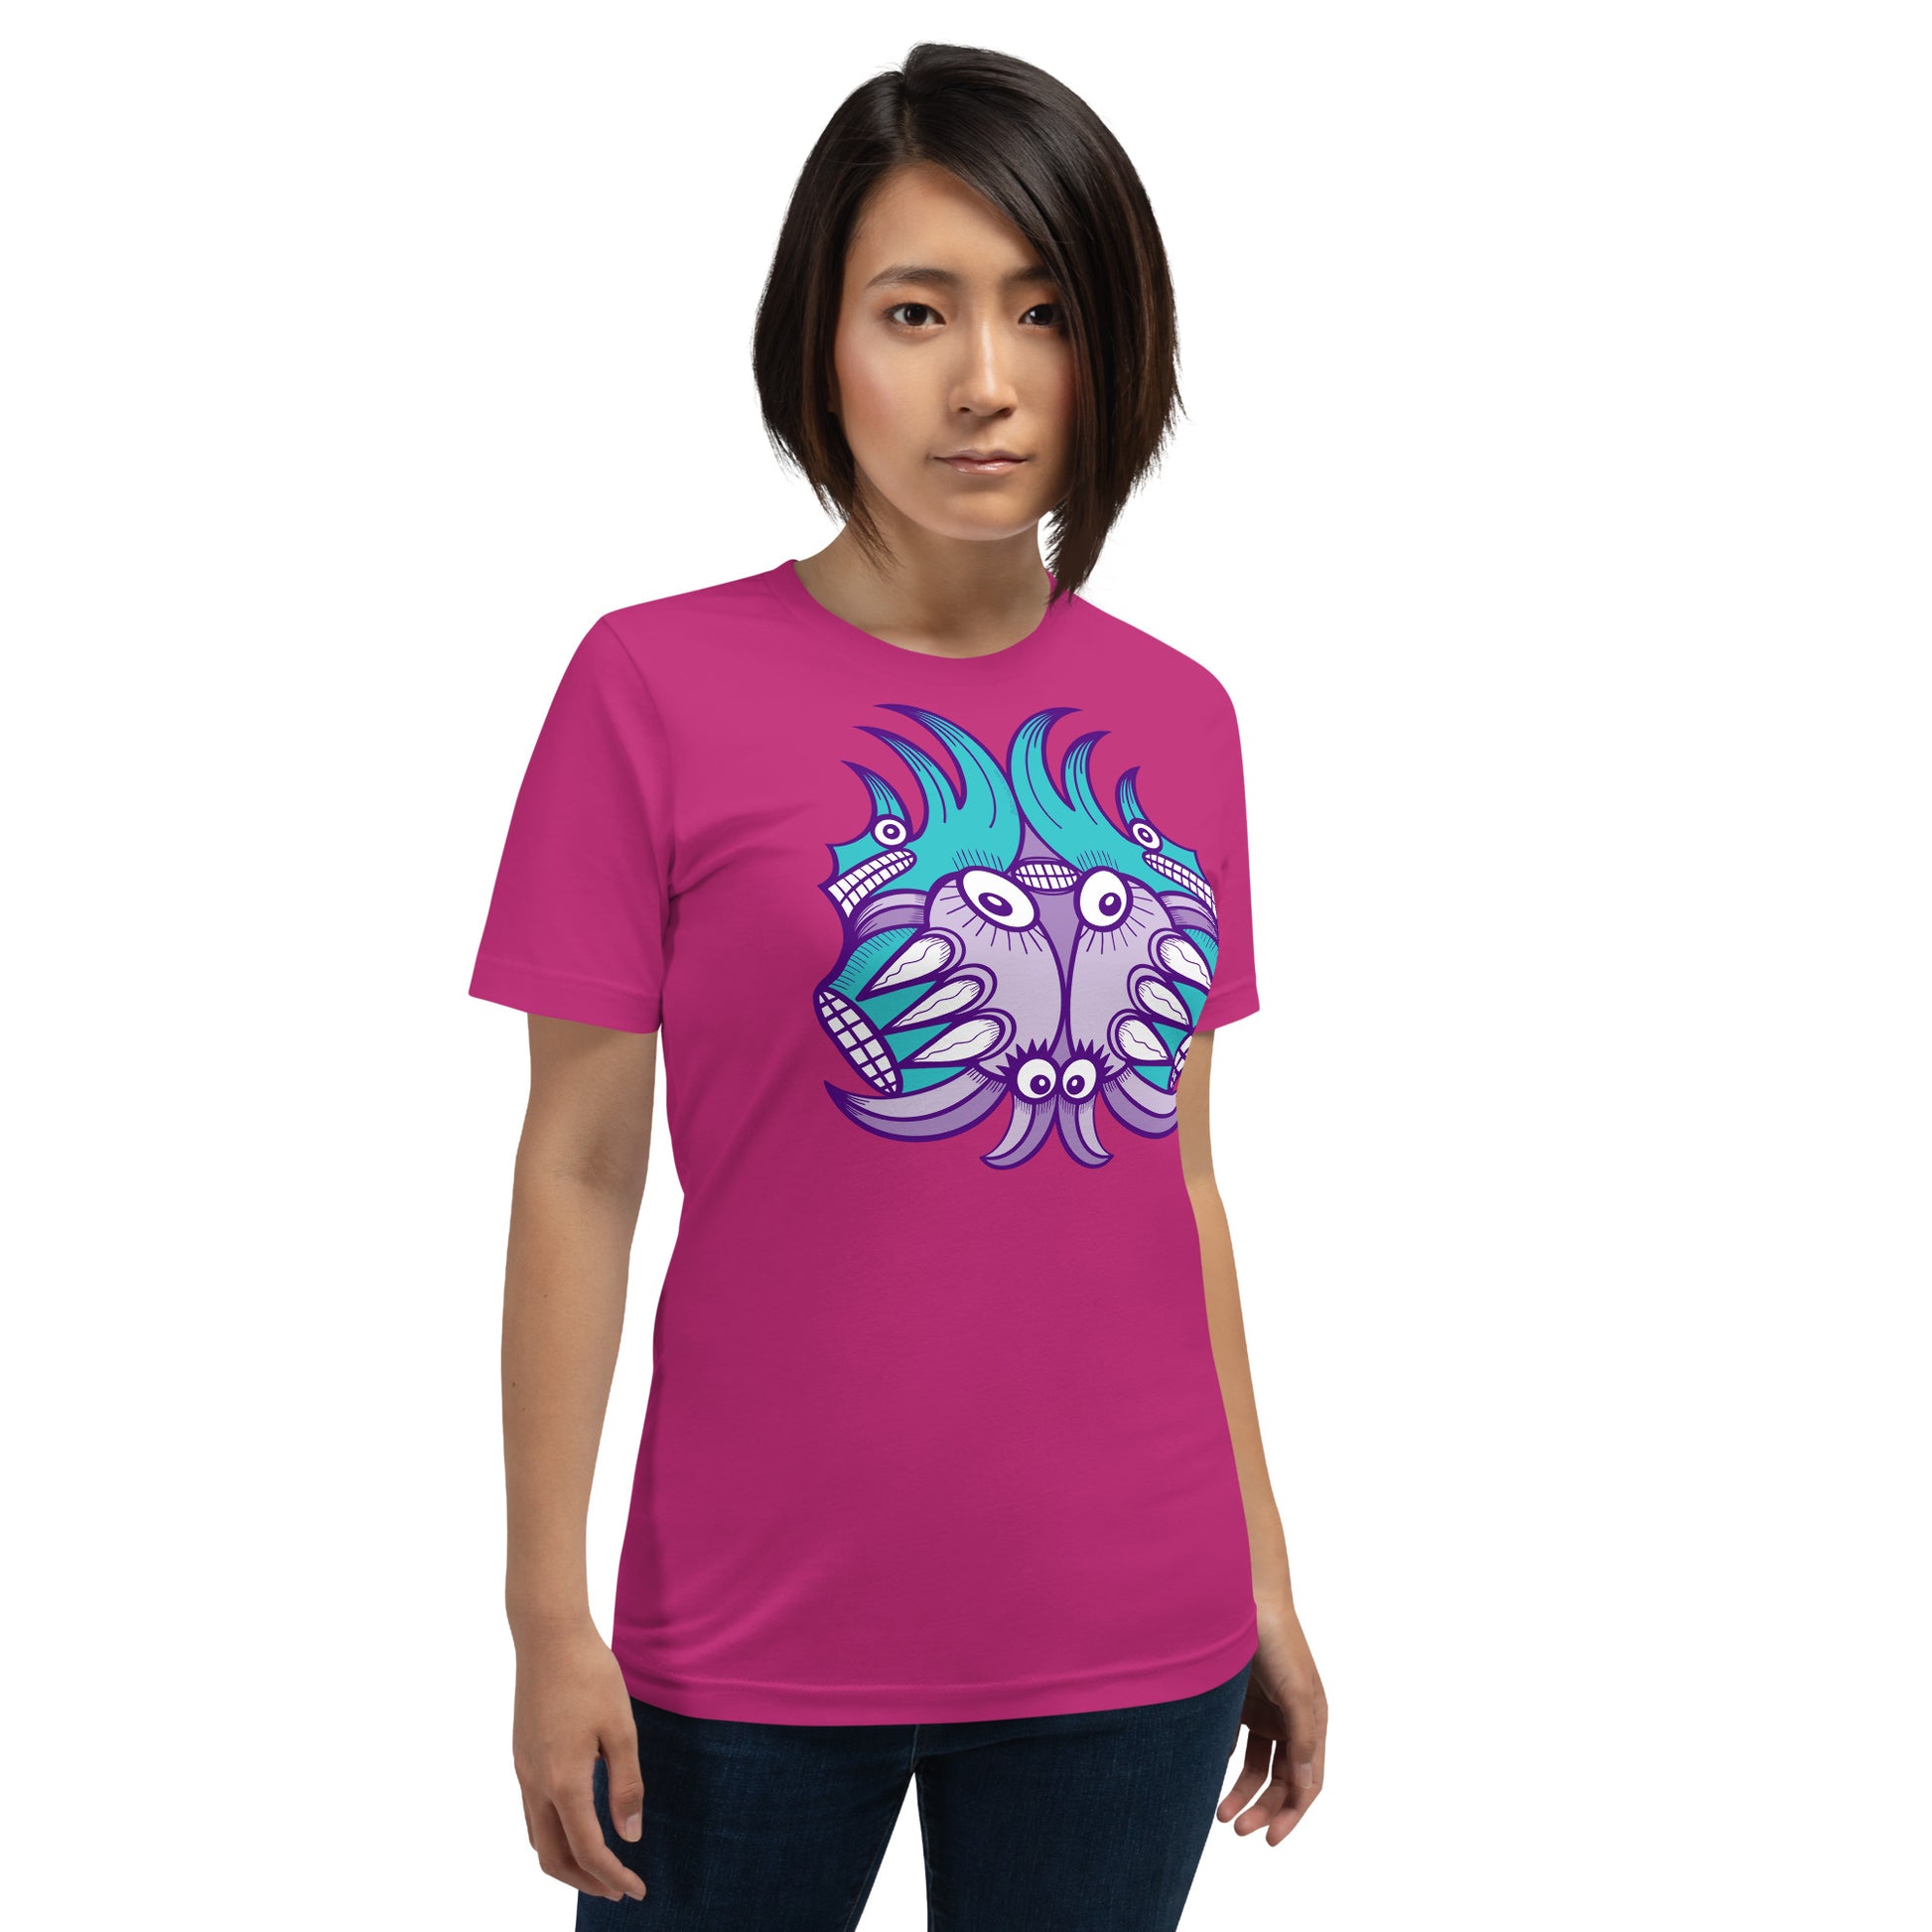 Planet 5: Aquatic Creatures from the Doodles of the Galaxy - Unisex t-shirt. Woman wearing an Berry color model